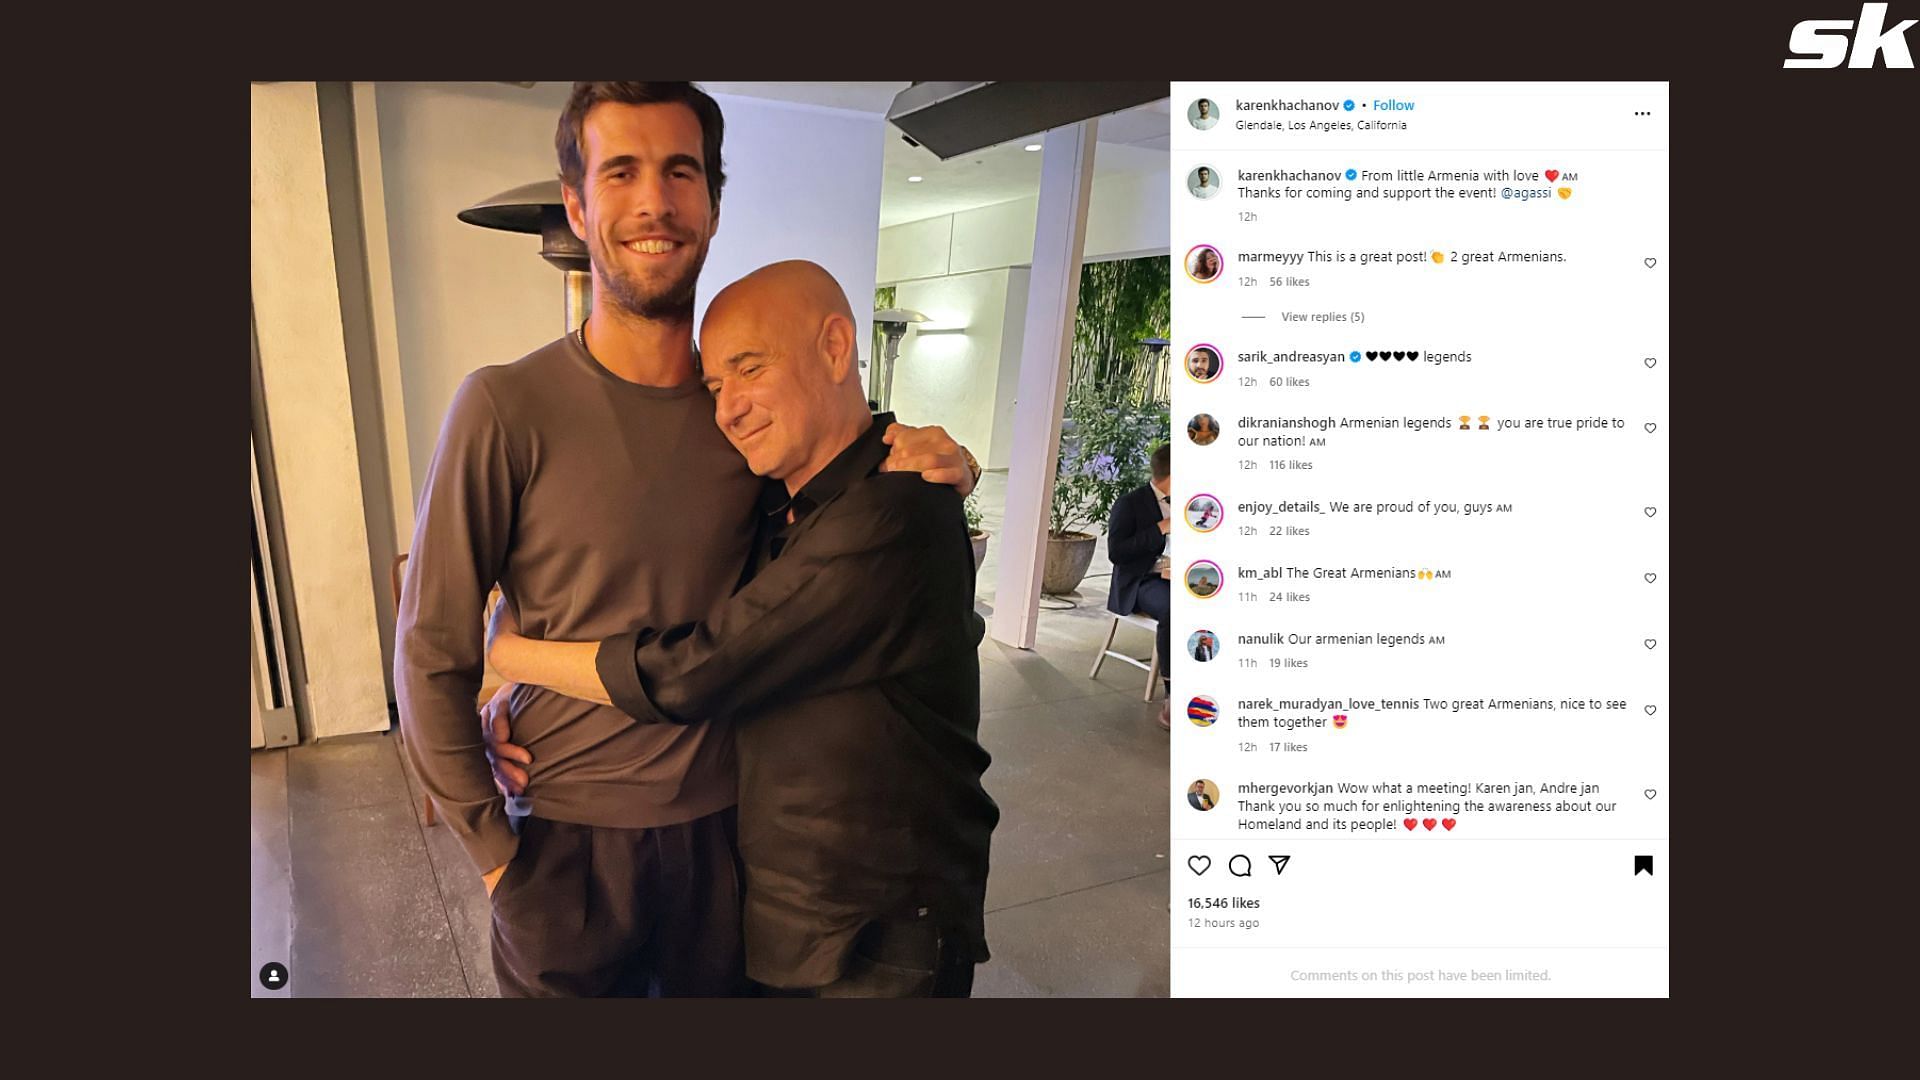 Karen Khachanov shares a light-hearted moment with Andre Agassi in Glendale, Los Angeles, California